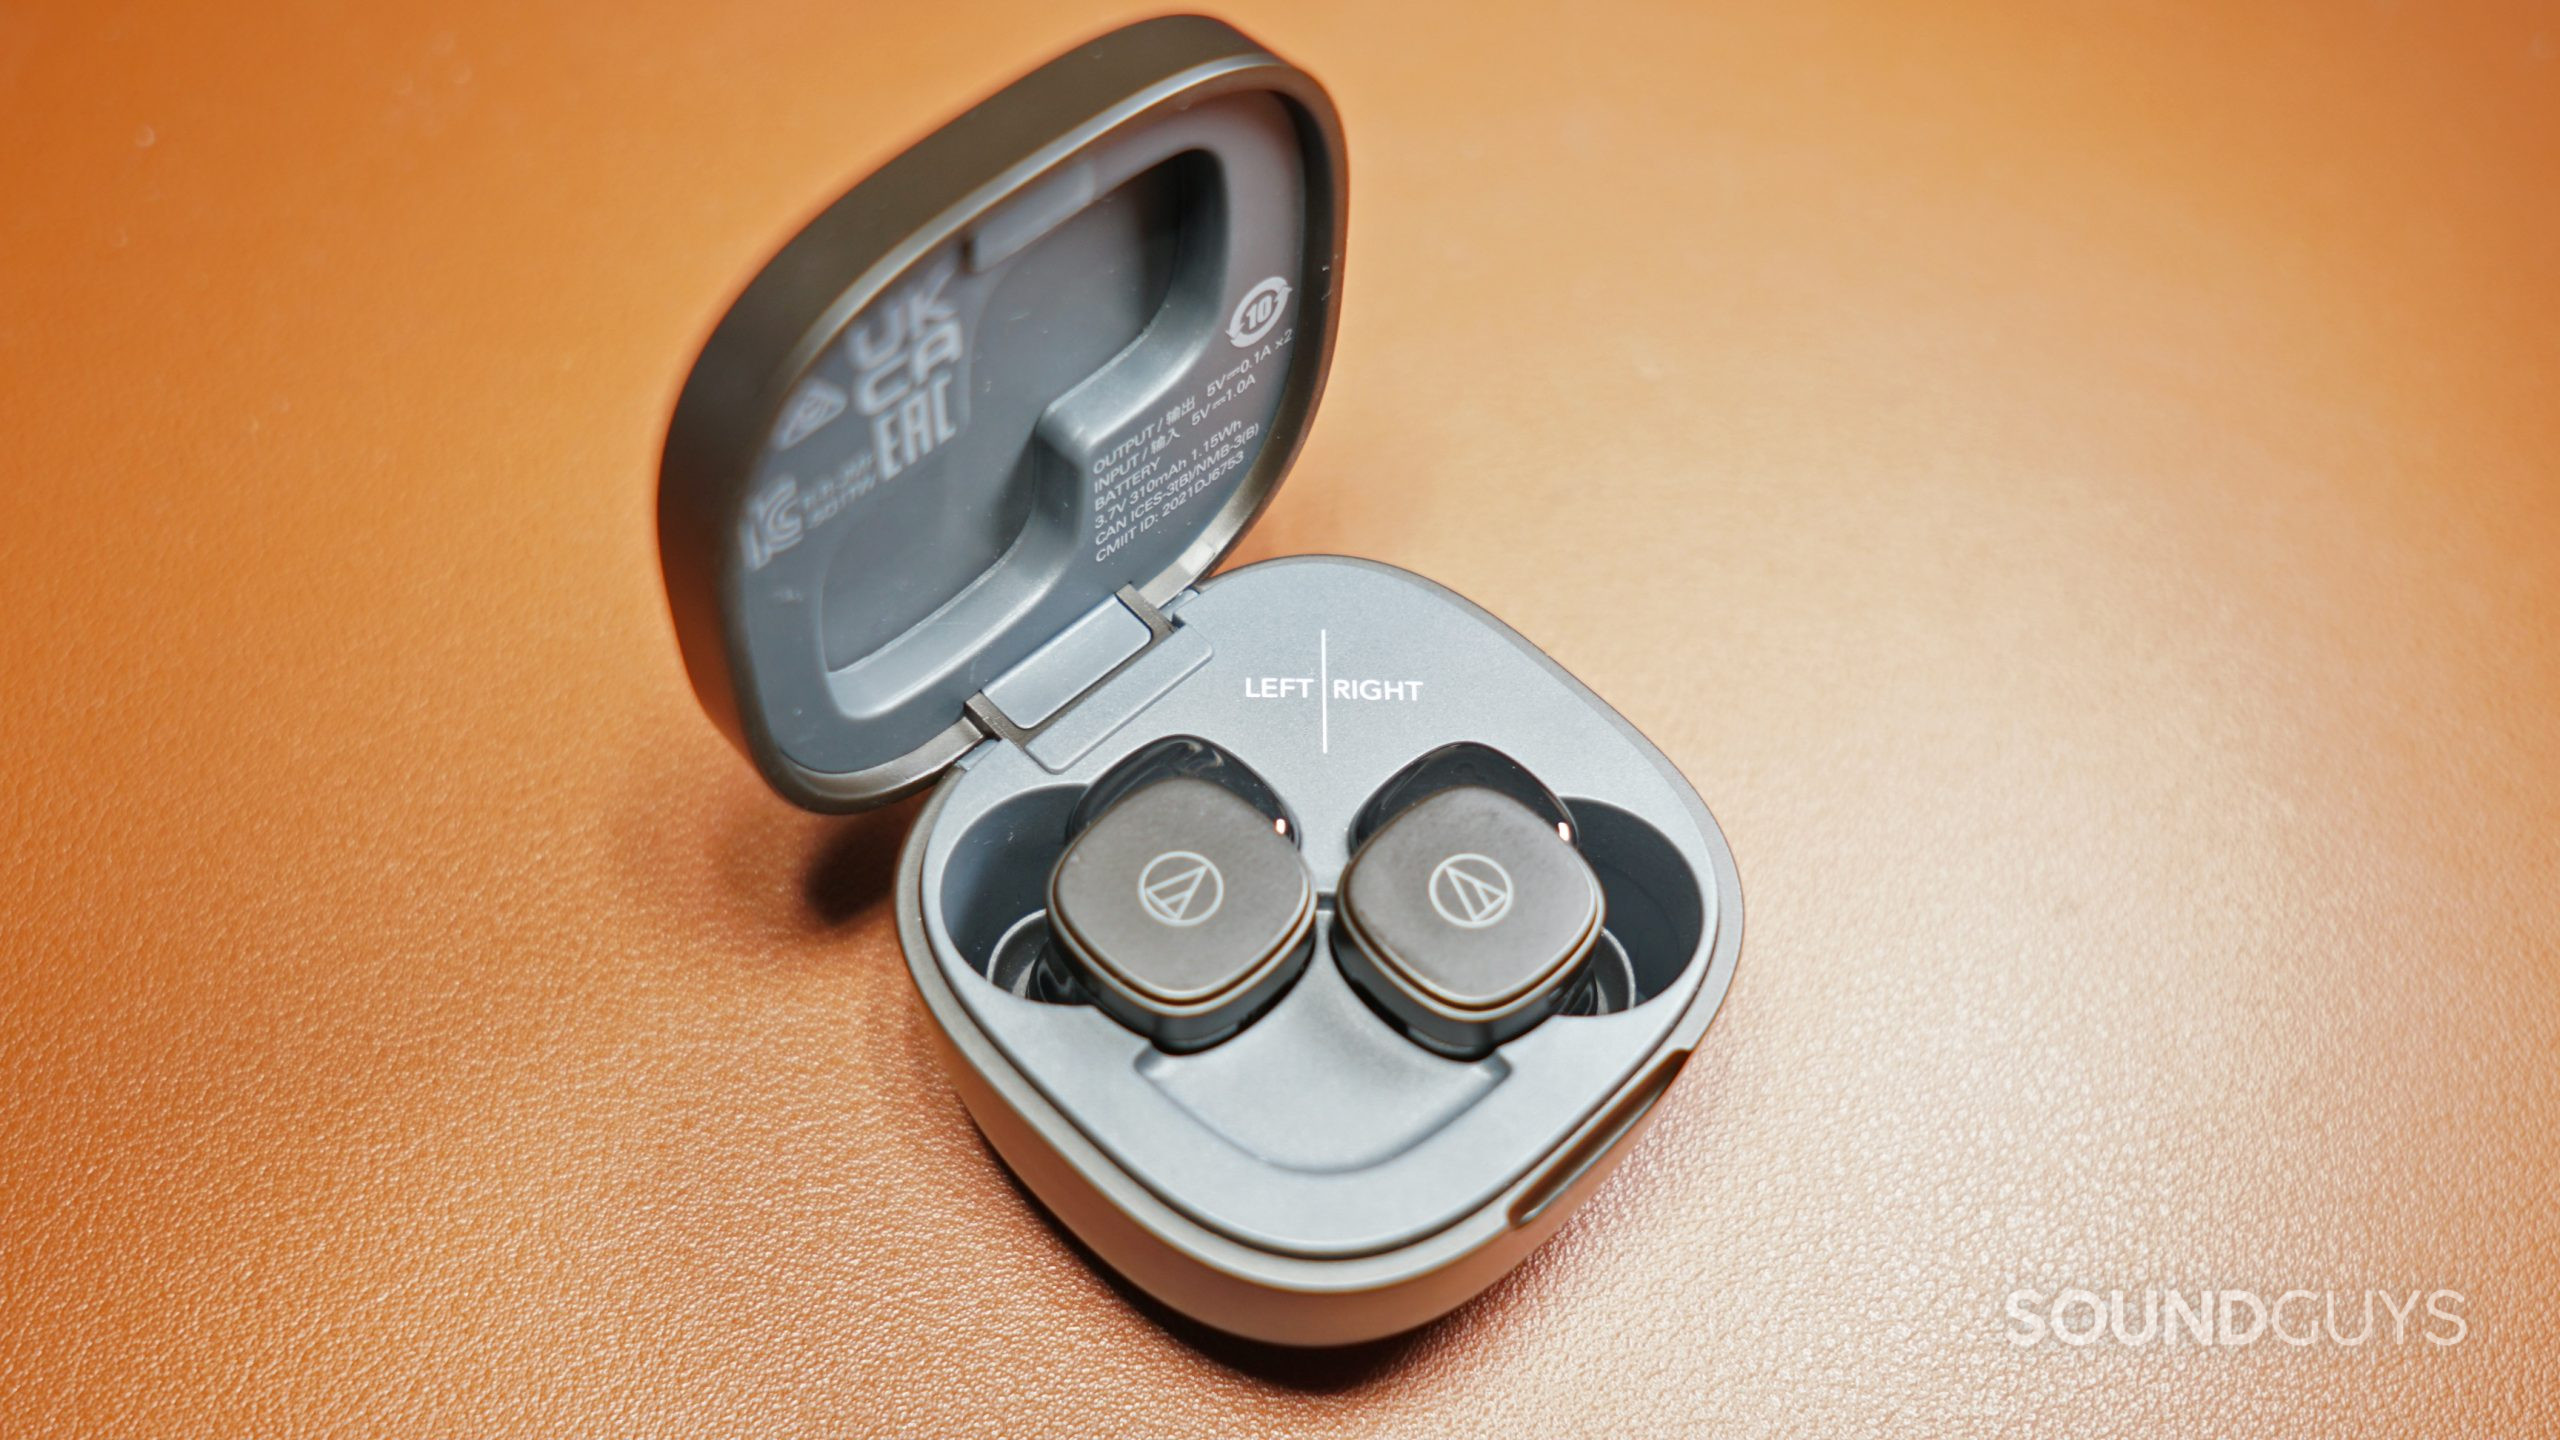 The Audio-Technica ATH-SQ1TW sits in its charging case on a leather surface